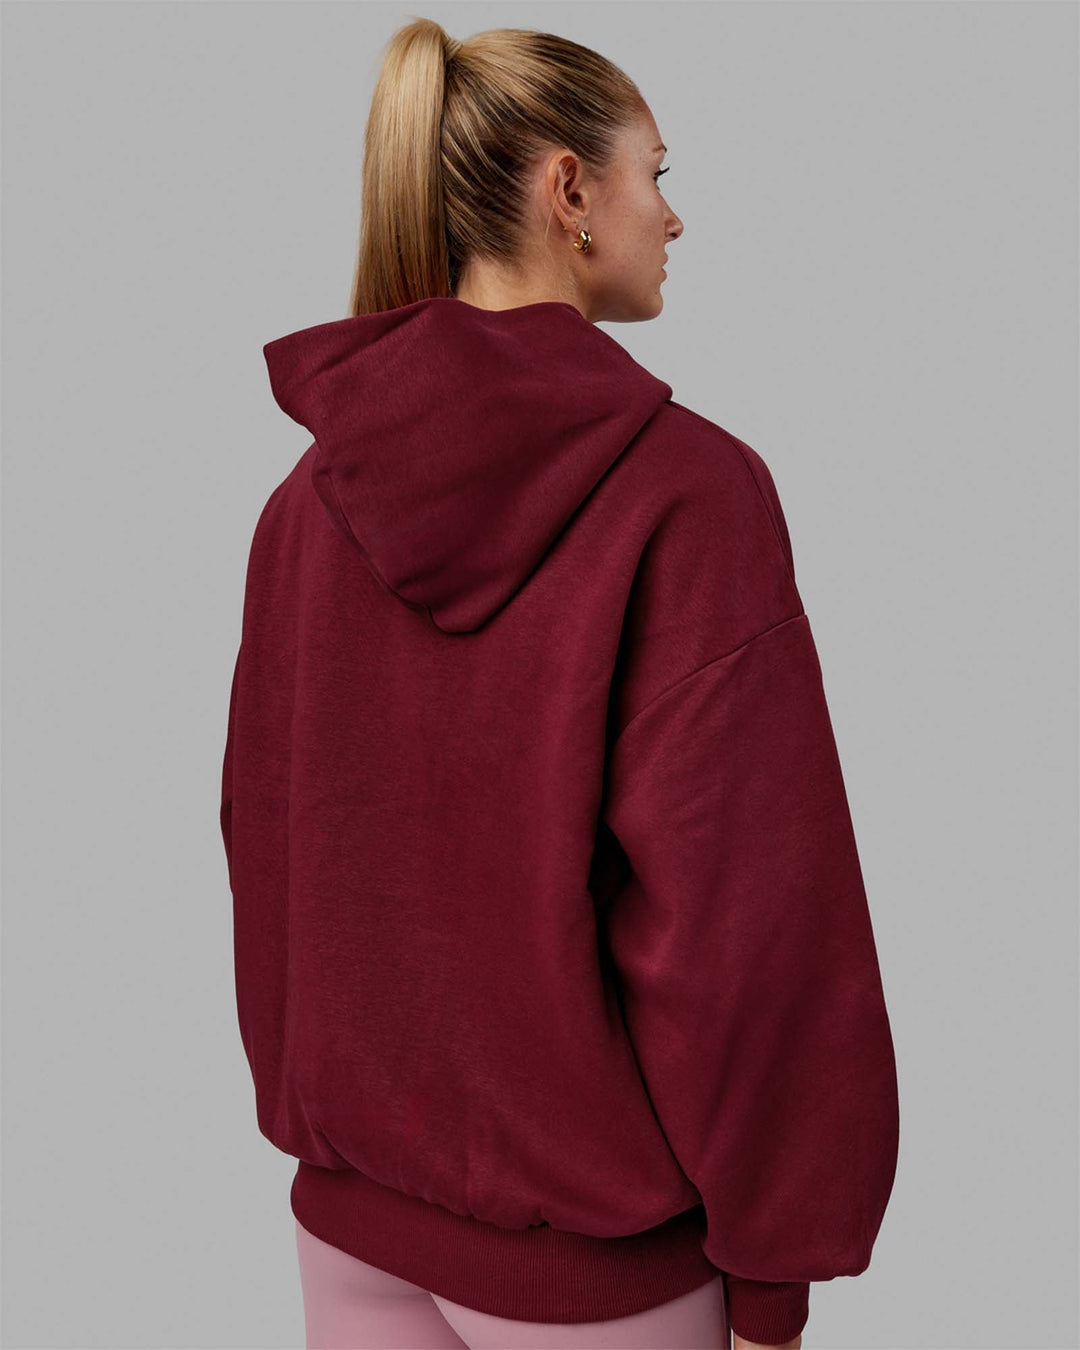 Woman wearing Unisex 1% Better Hoodie Oversize - Cranberry-White